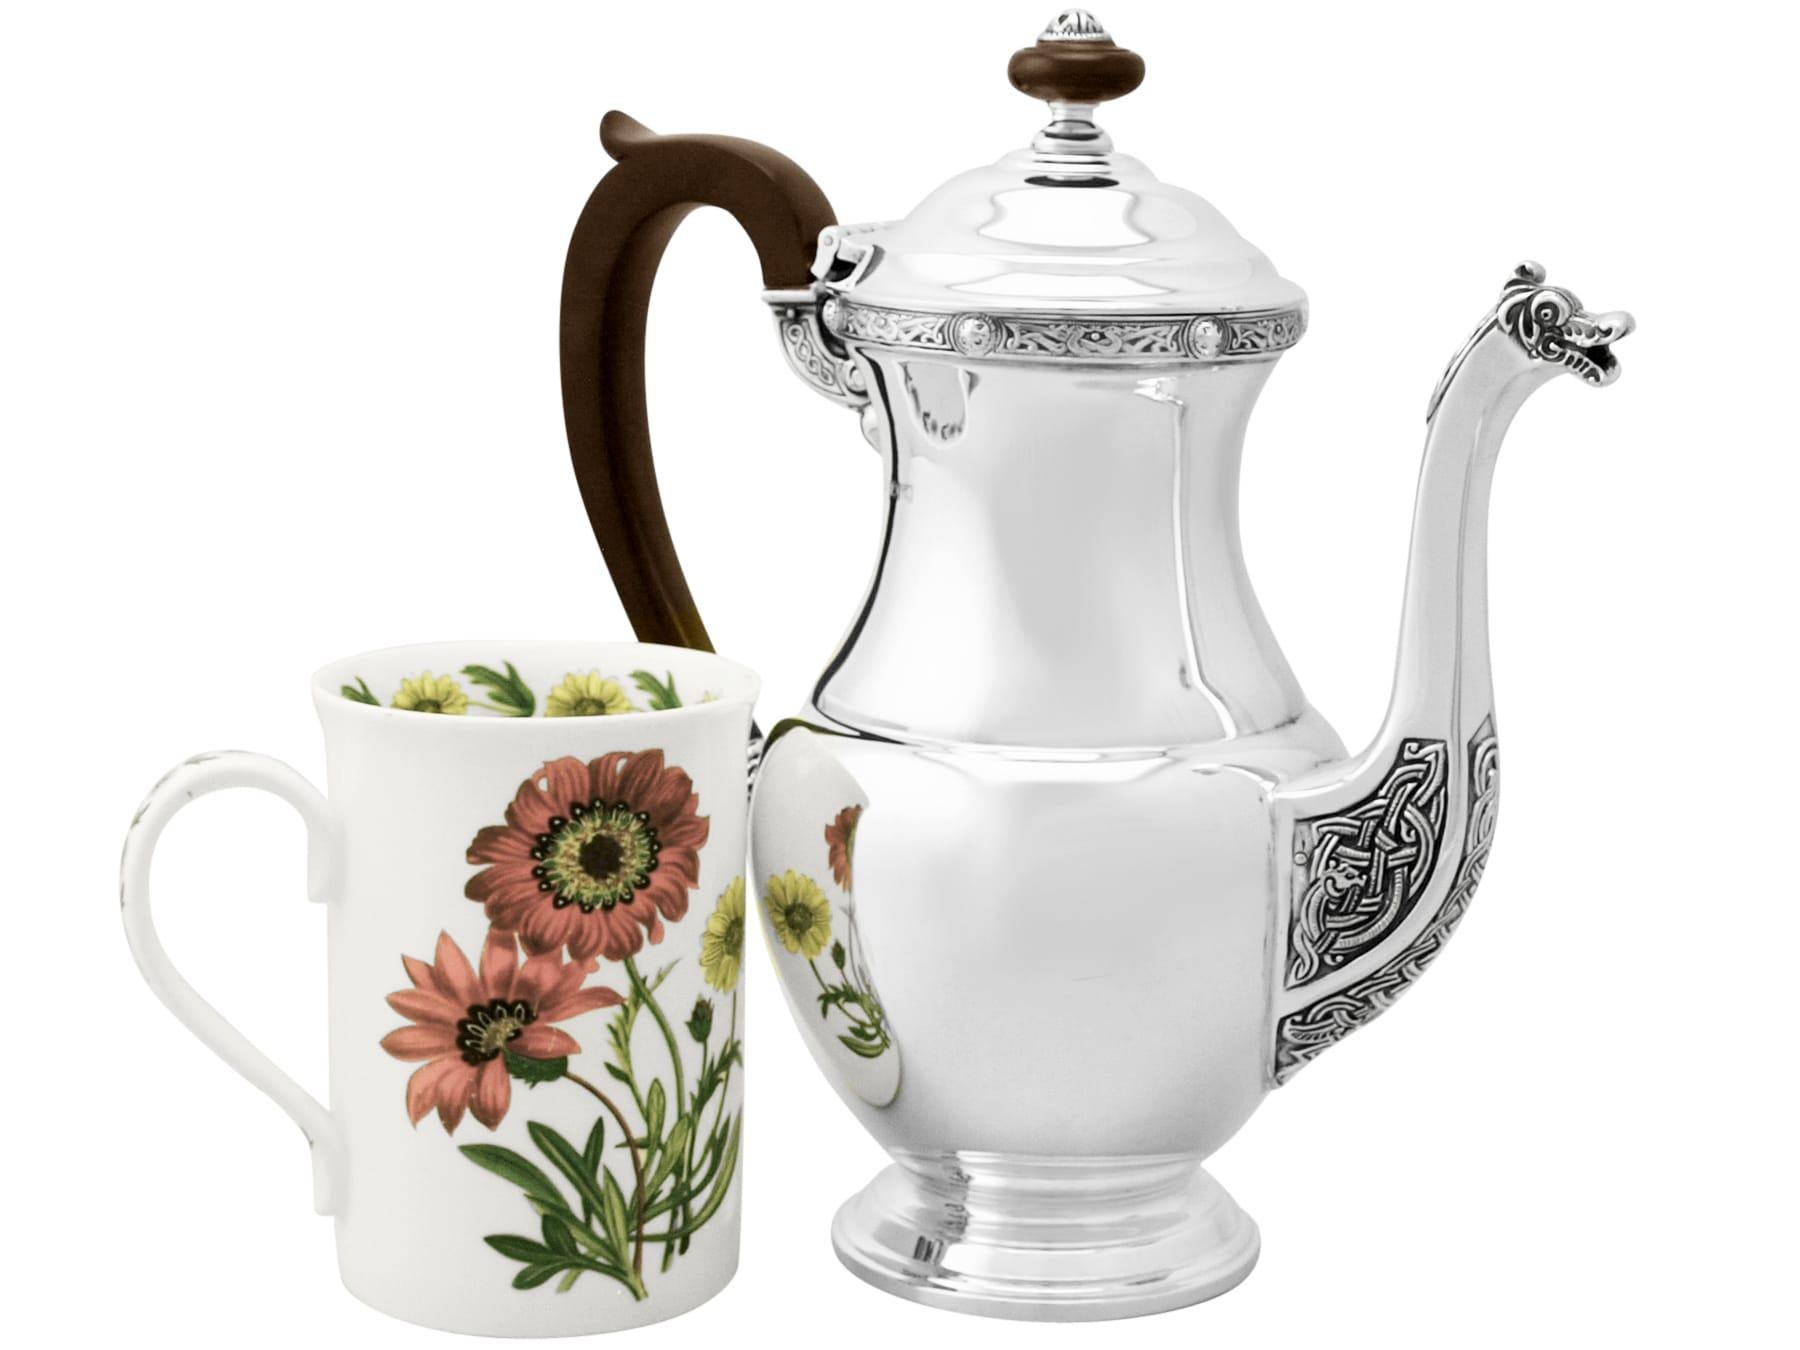 A fine and impressive vintage Elizabeth II English sterling silver coffee pot, an addition to our silver teaware collection.

This fine vintage Elizabeth II sterling silver coffee pot has a plain baluster shaped form onto a circular domed